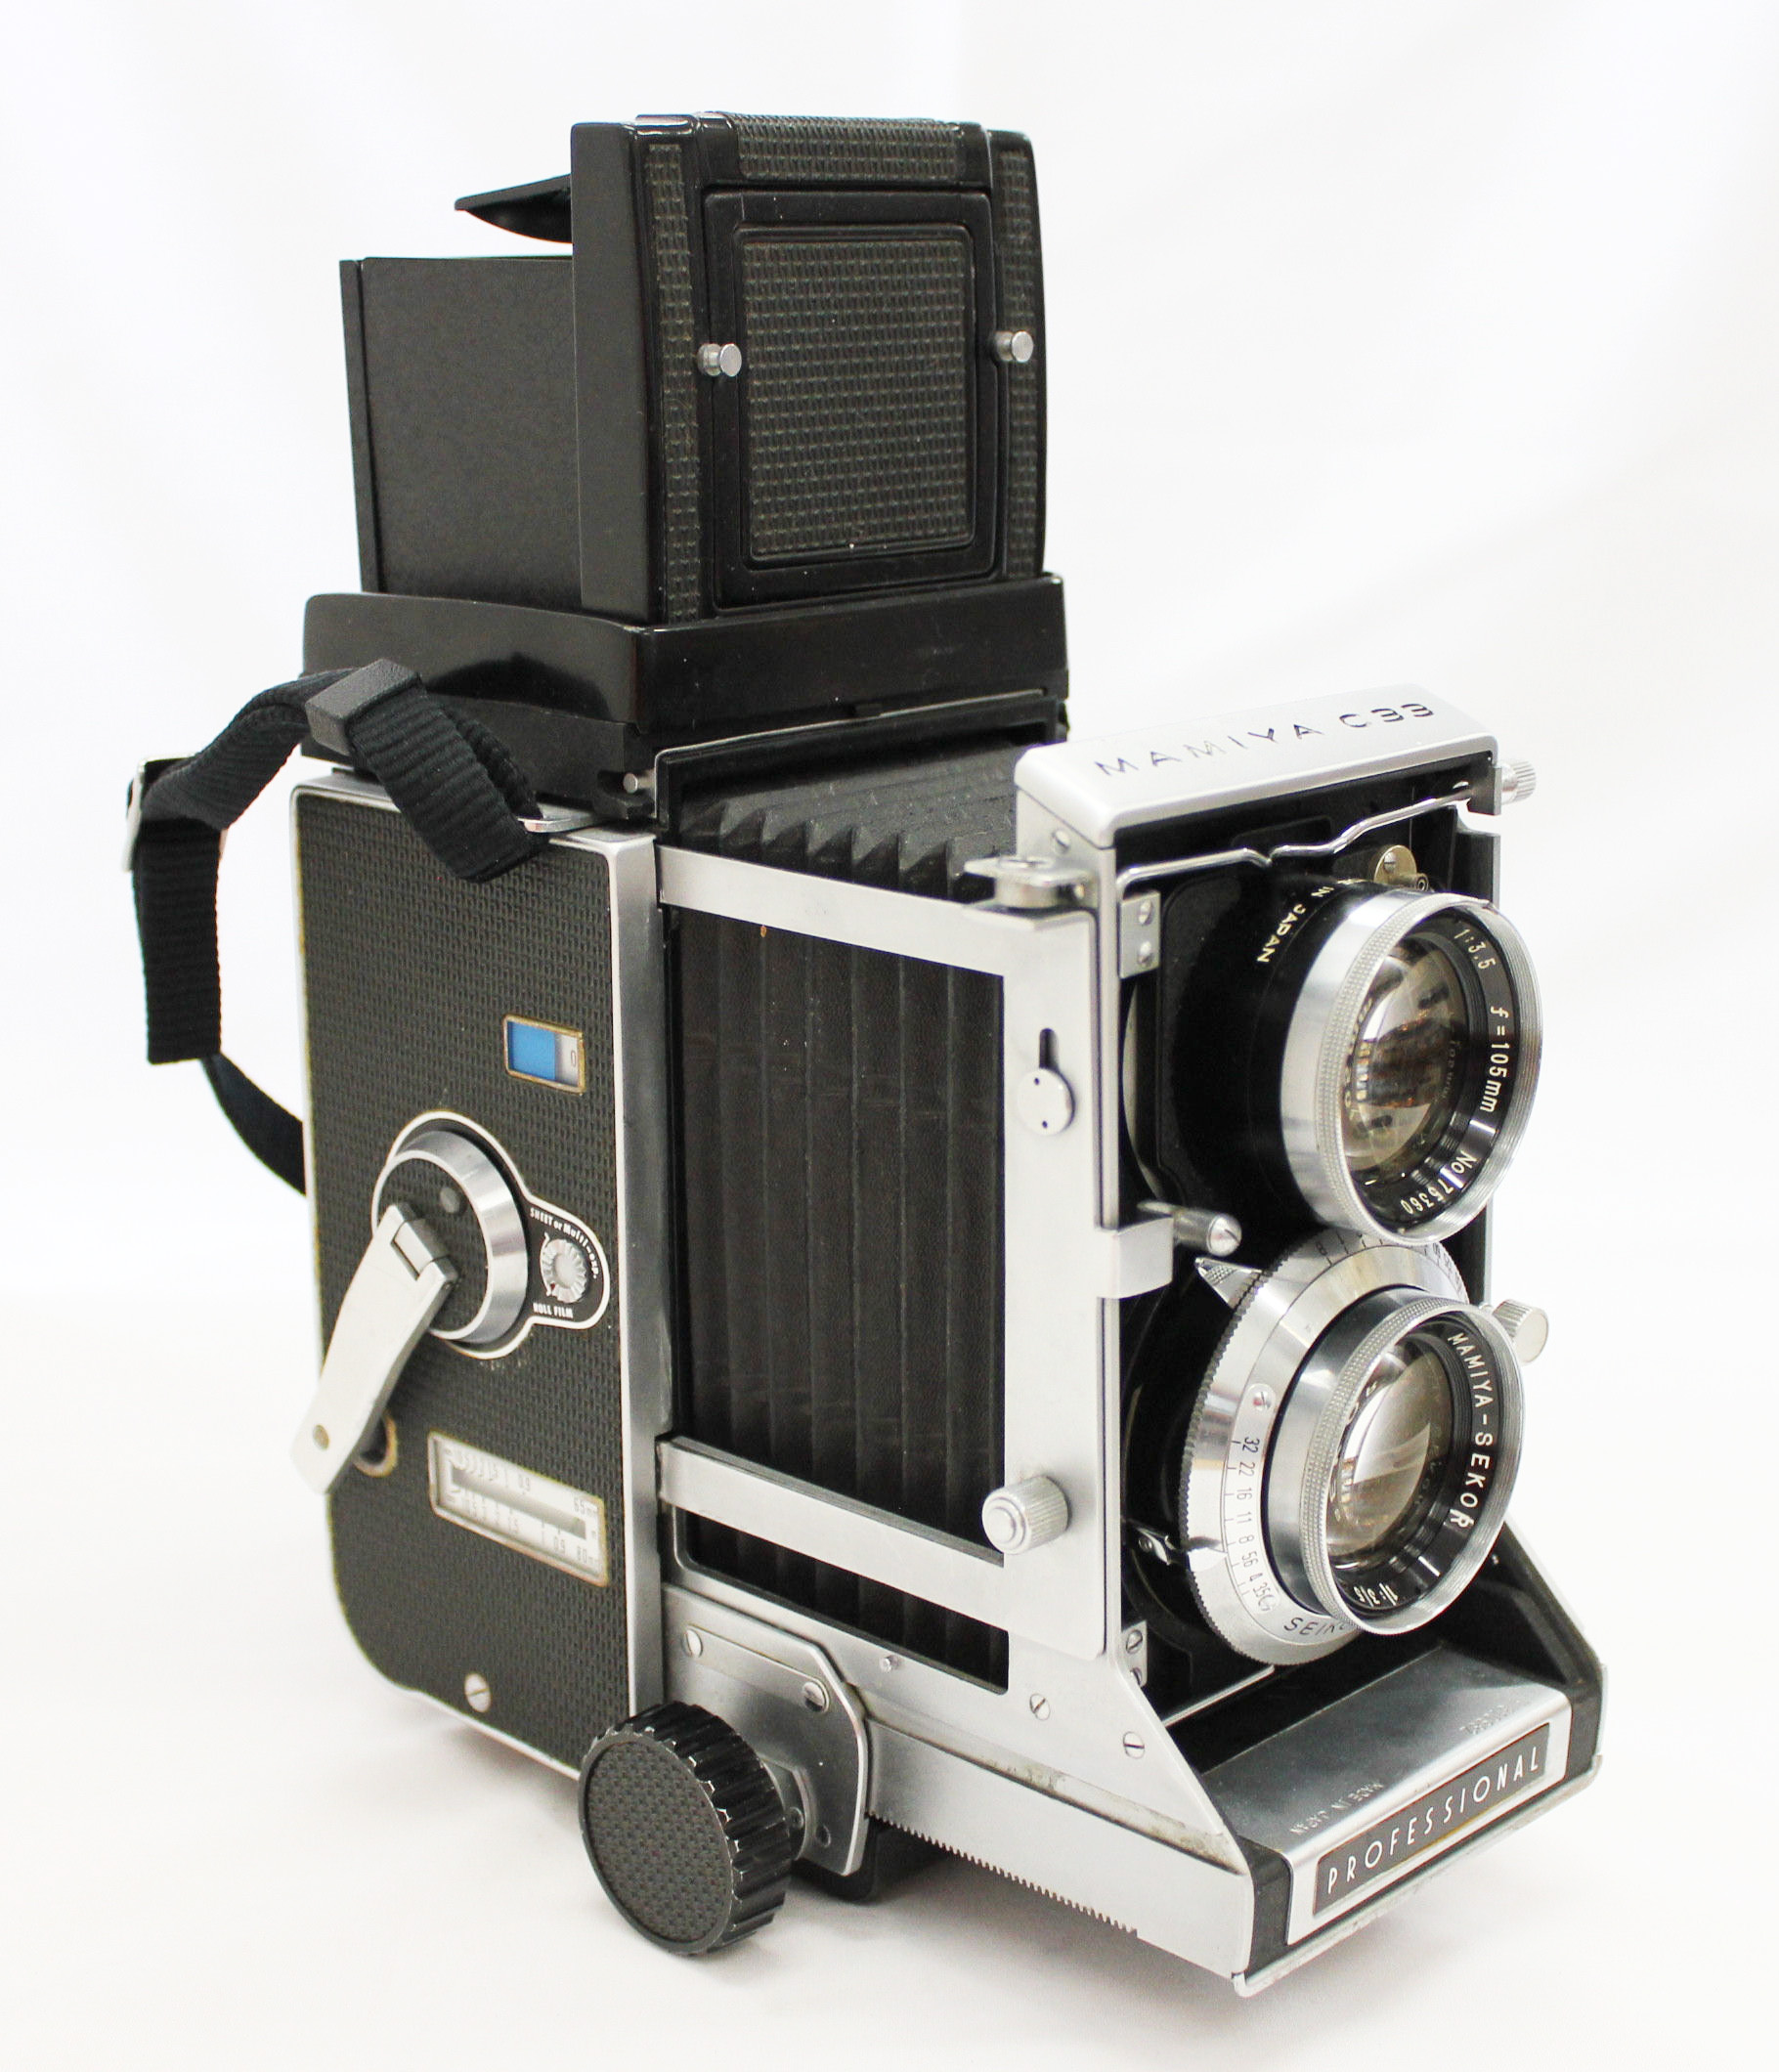  Mamiya C33 Professional Medium Format TLR with 105mm F/3.5 Lens from Japan Photo 1